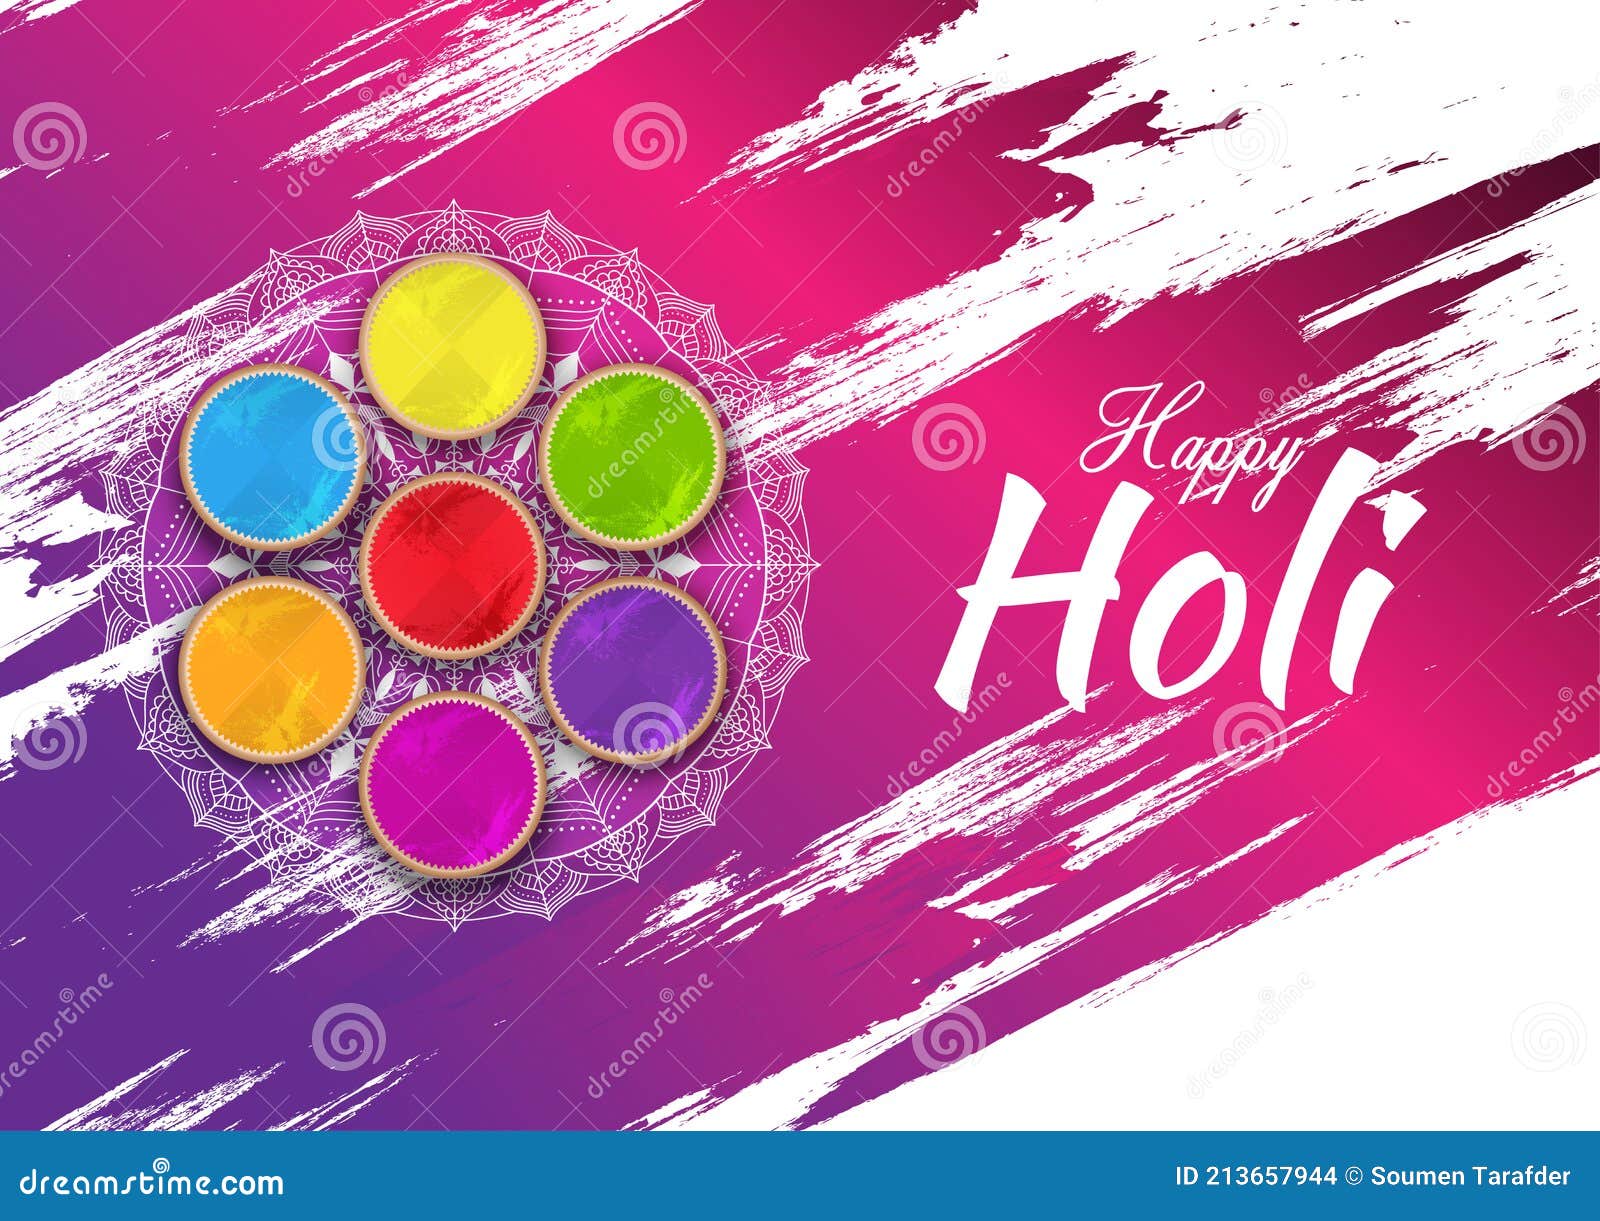 Happy Holi Festival Vector Illustration Background with Abstract Powder  Color Bowls Stock Vector - Illustration of culture, color: 213657944